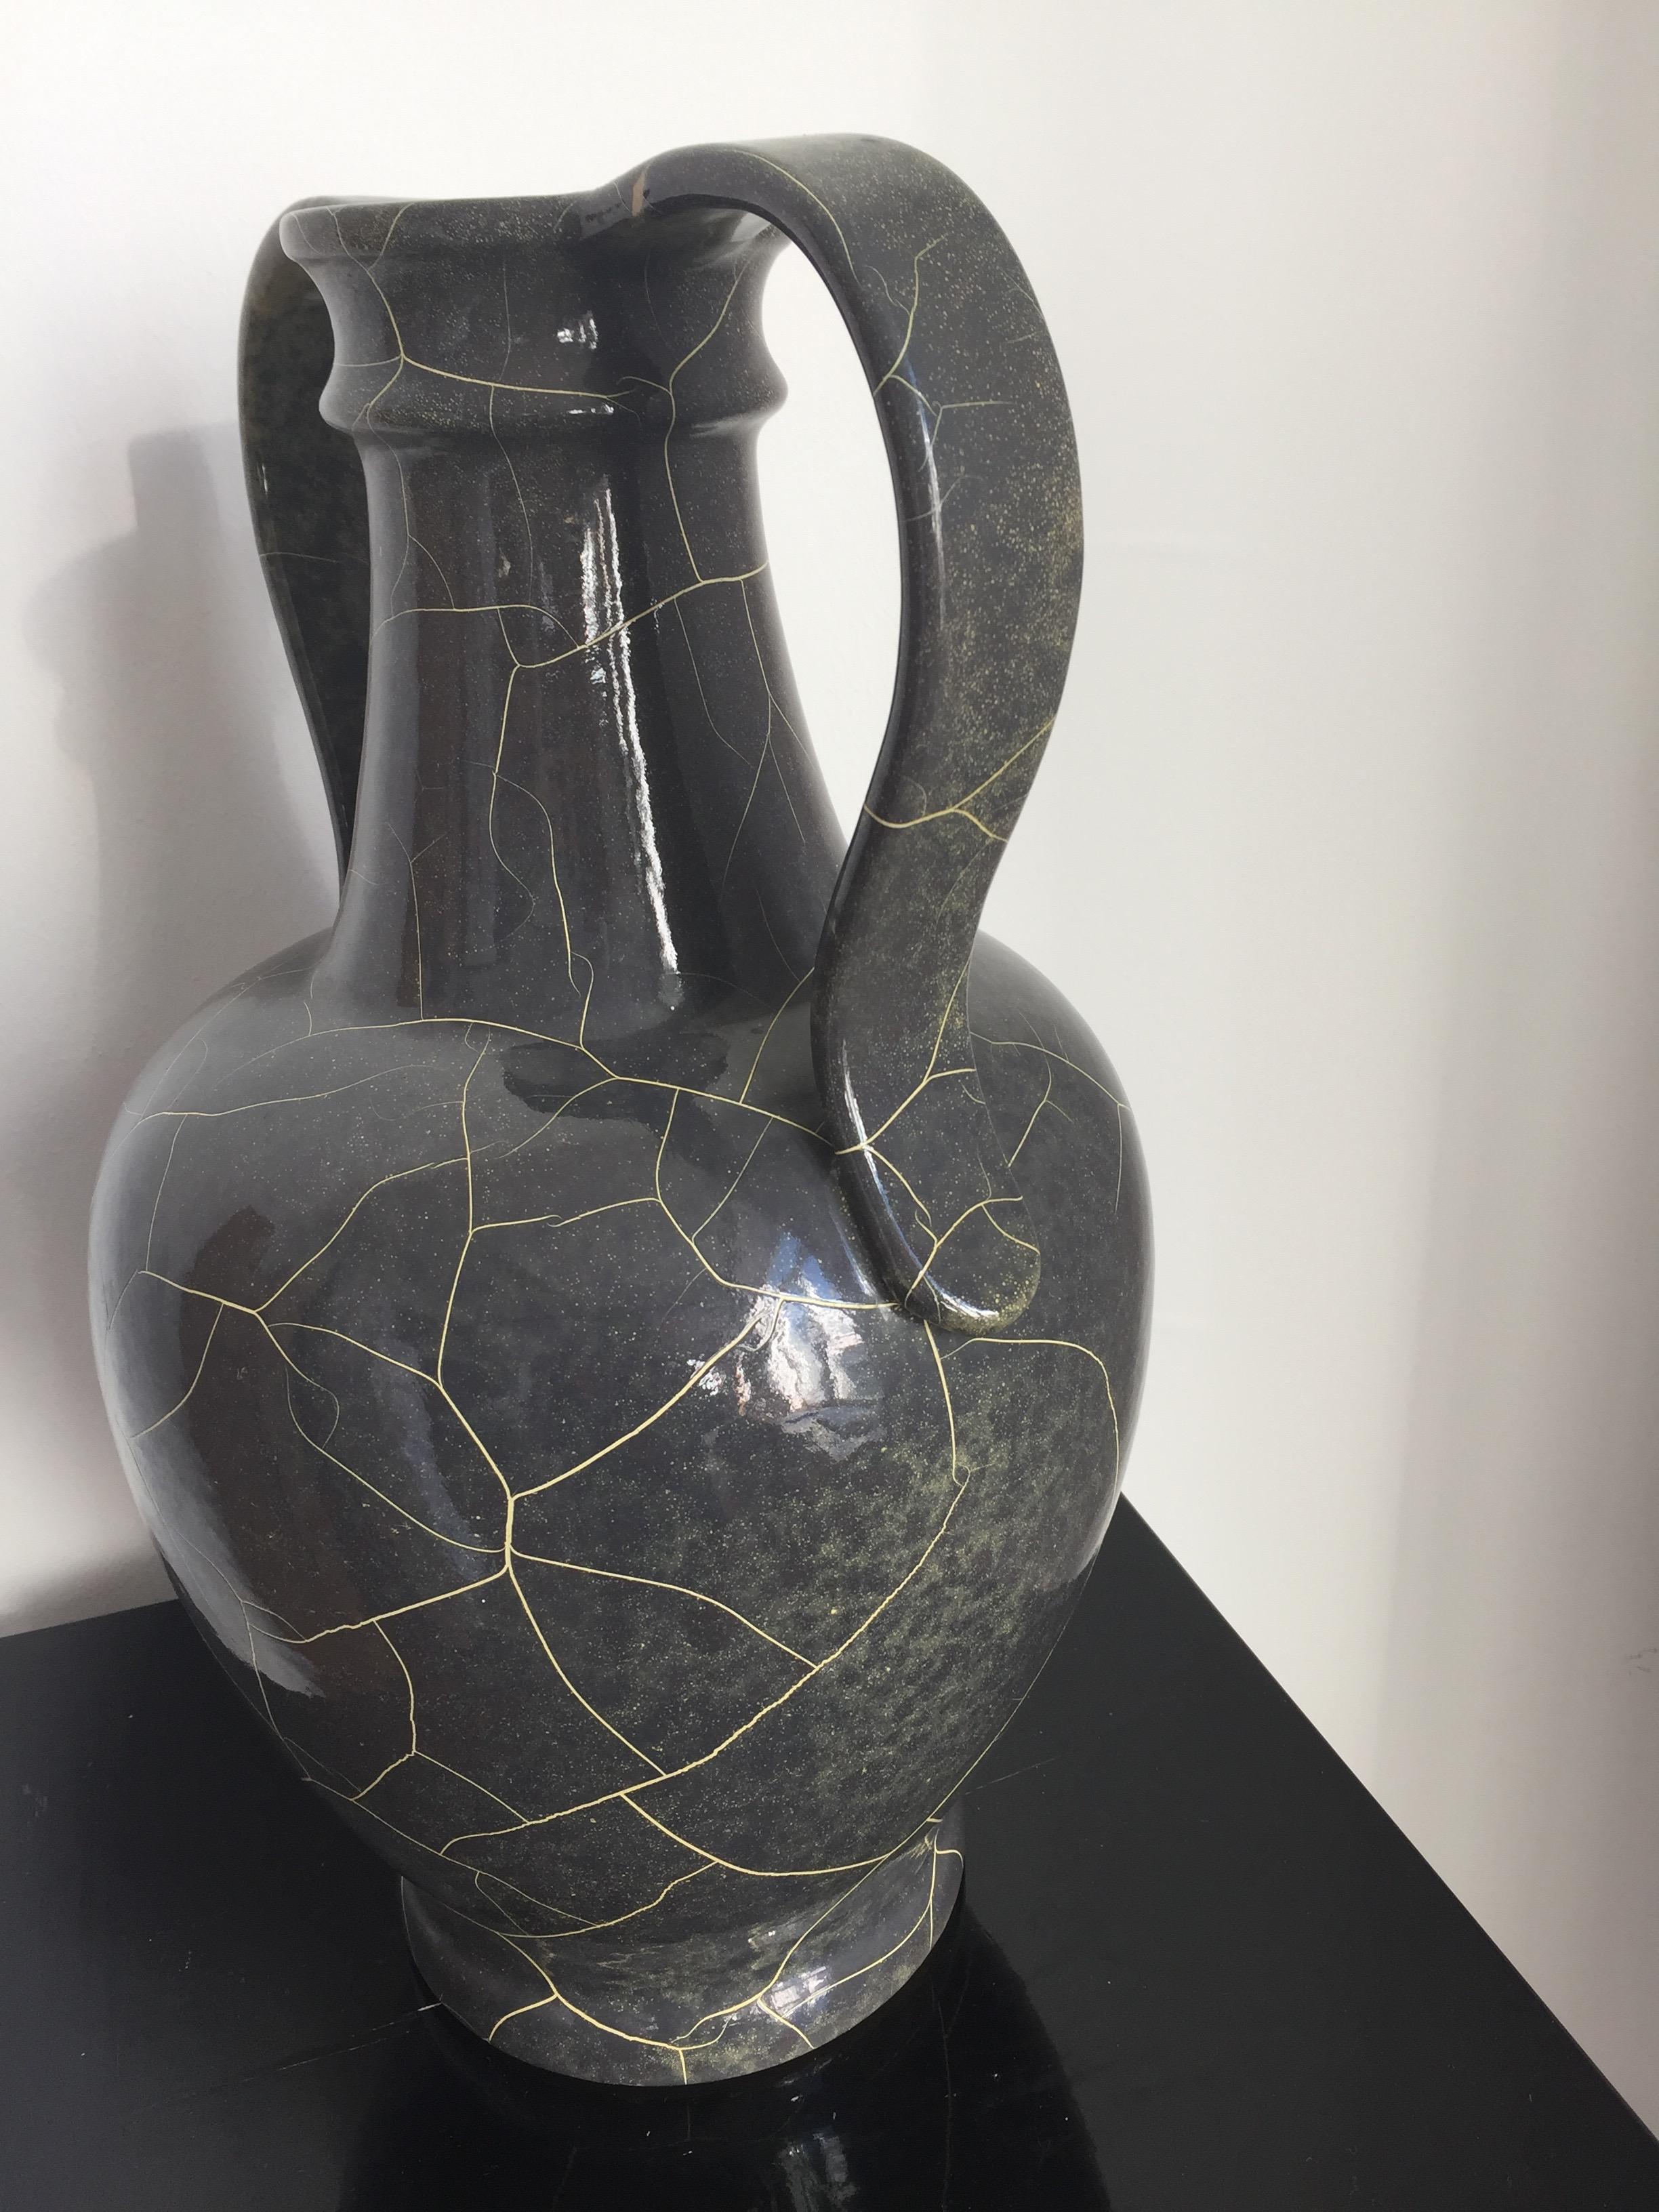 Rare ceramic jar by Richard Uhlemeyer, German ceramist,

Large vase, beautiful glaze in grey and primrose

Germany, 1940s, stamped at the bottom edge, very good condition, 

Size 44cm high x 39 cm diameter.